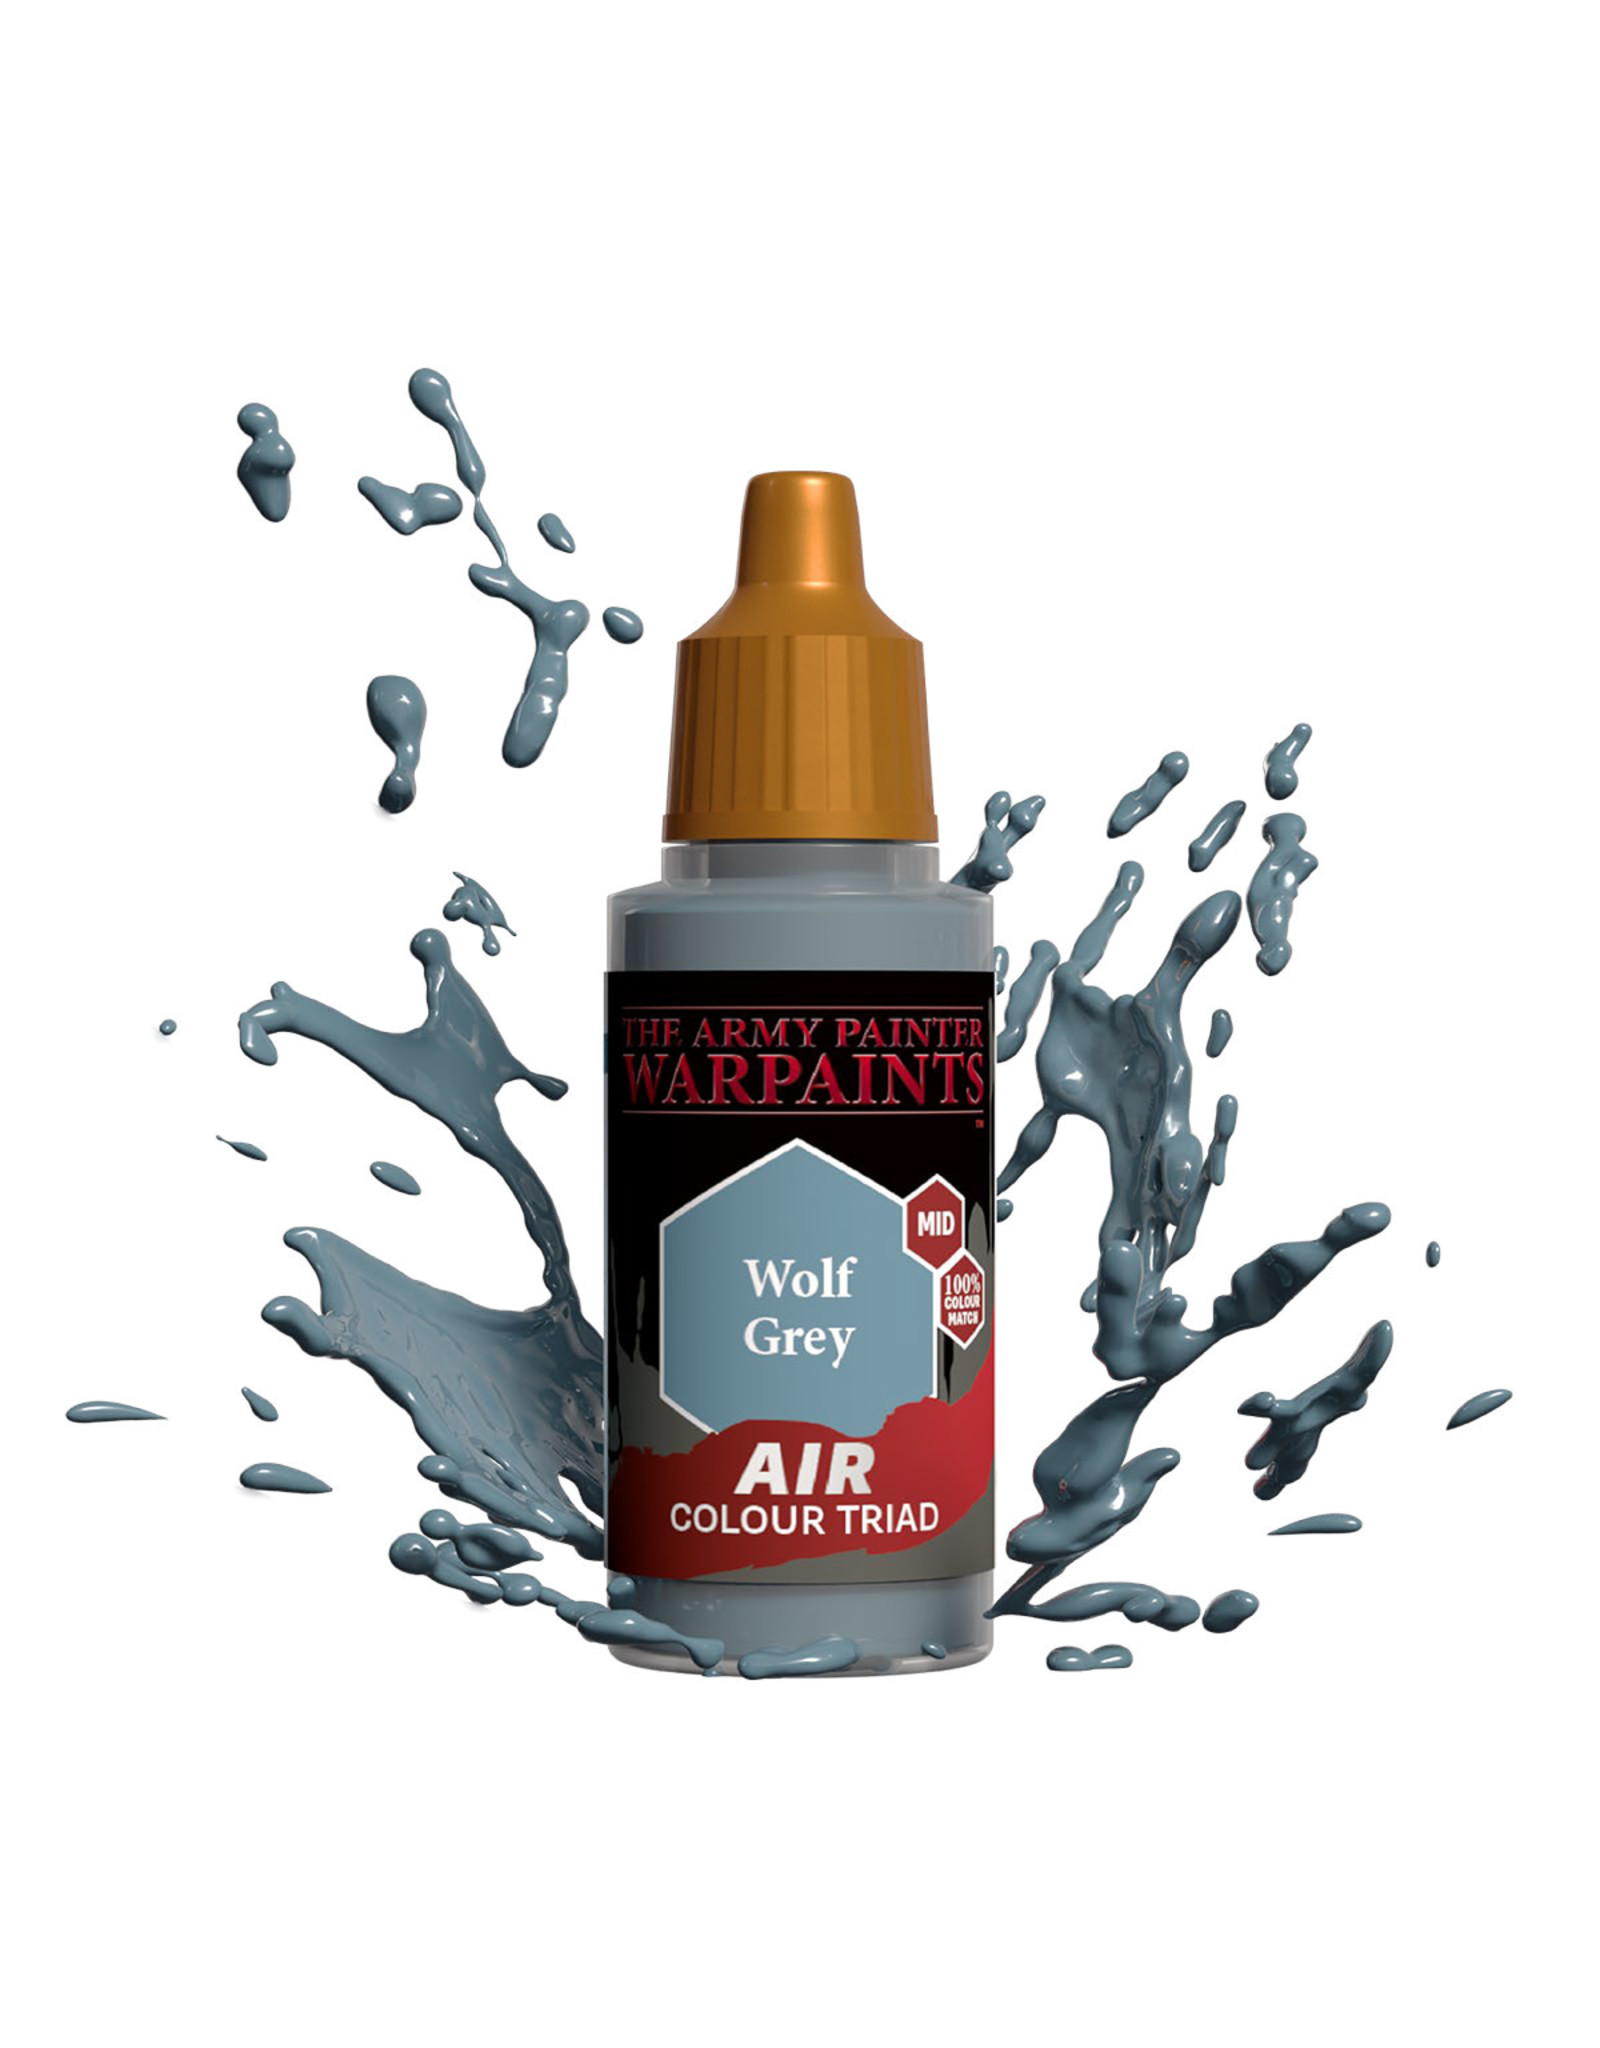 The Army Painter The Army Painter Warpaints Air: Wolf Grey